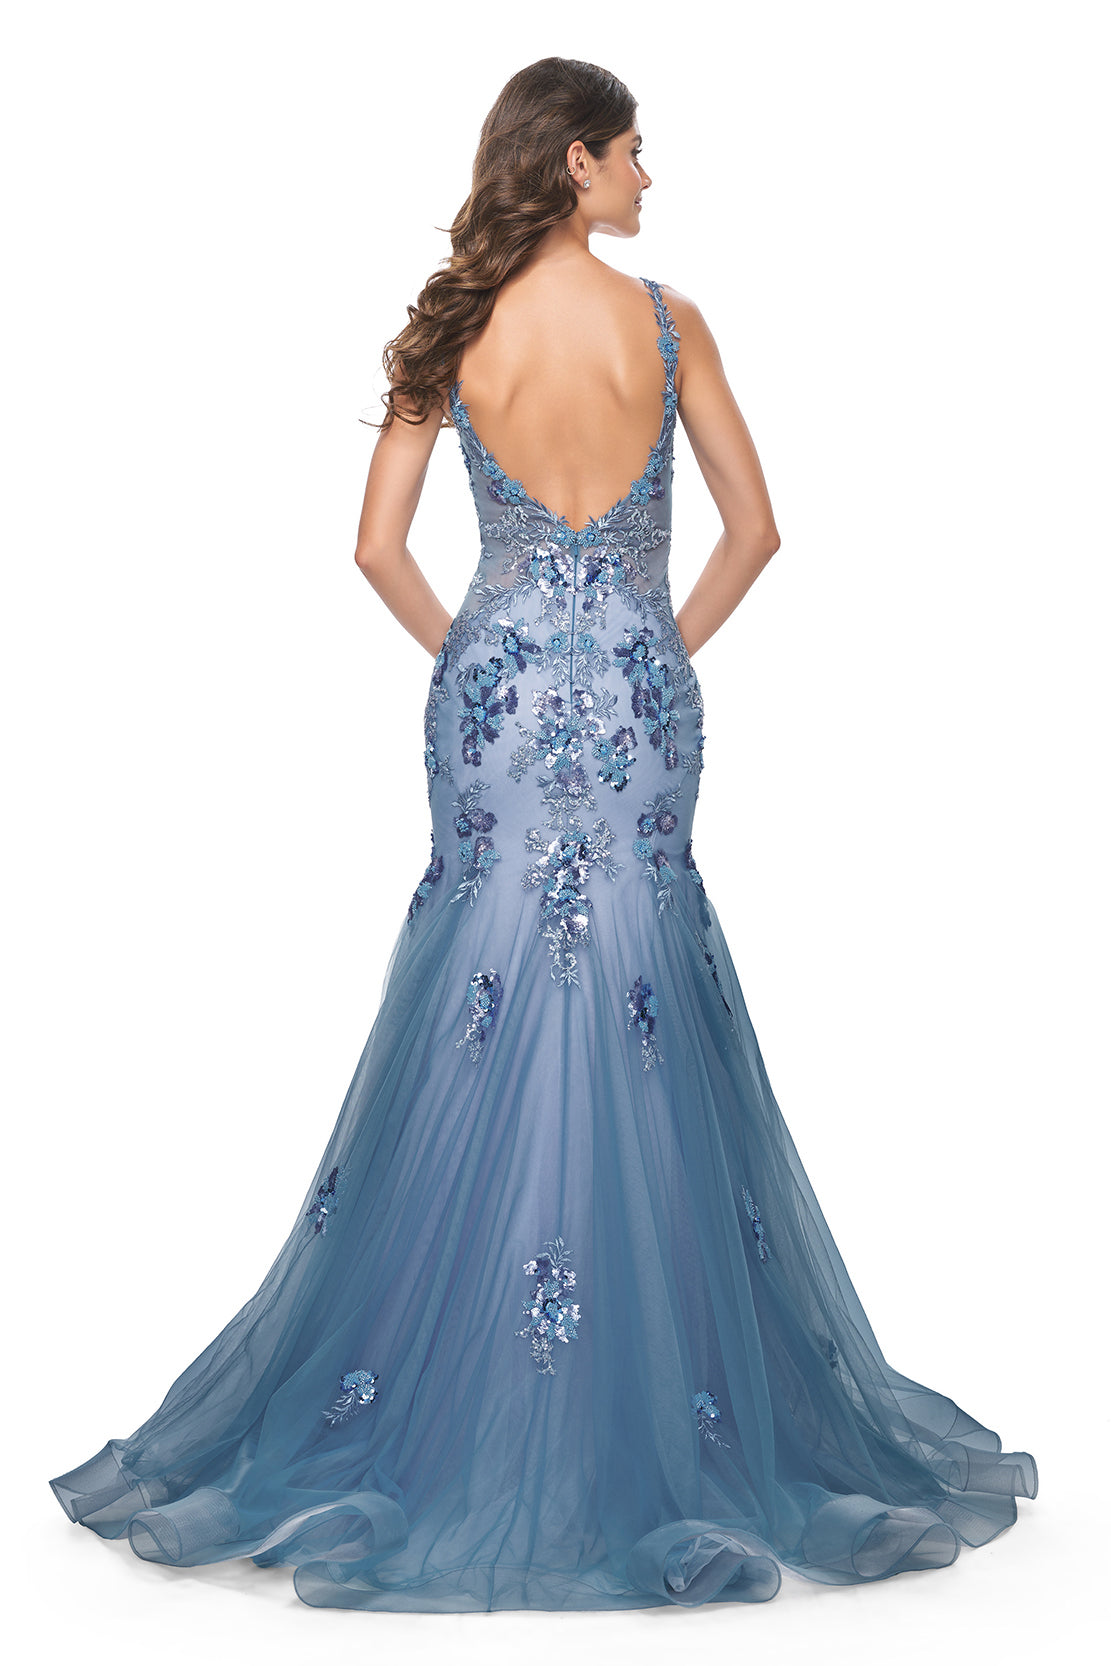 La Femme 32192 Two-Tone Mermaid Prom Gown - A stunning mermaid gown with a two-tone design, V neckline, sequin lace beaded floral applique, and illusion sides and back for an enchanting and captivating look. Perfect for prom night.